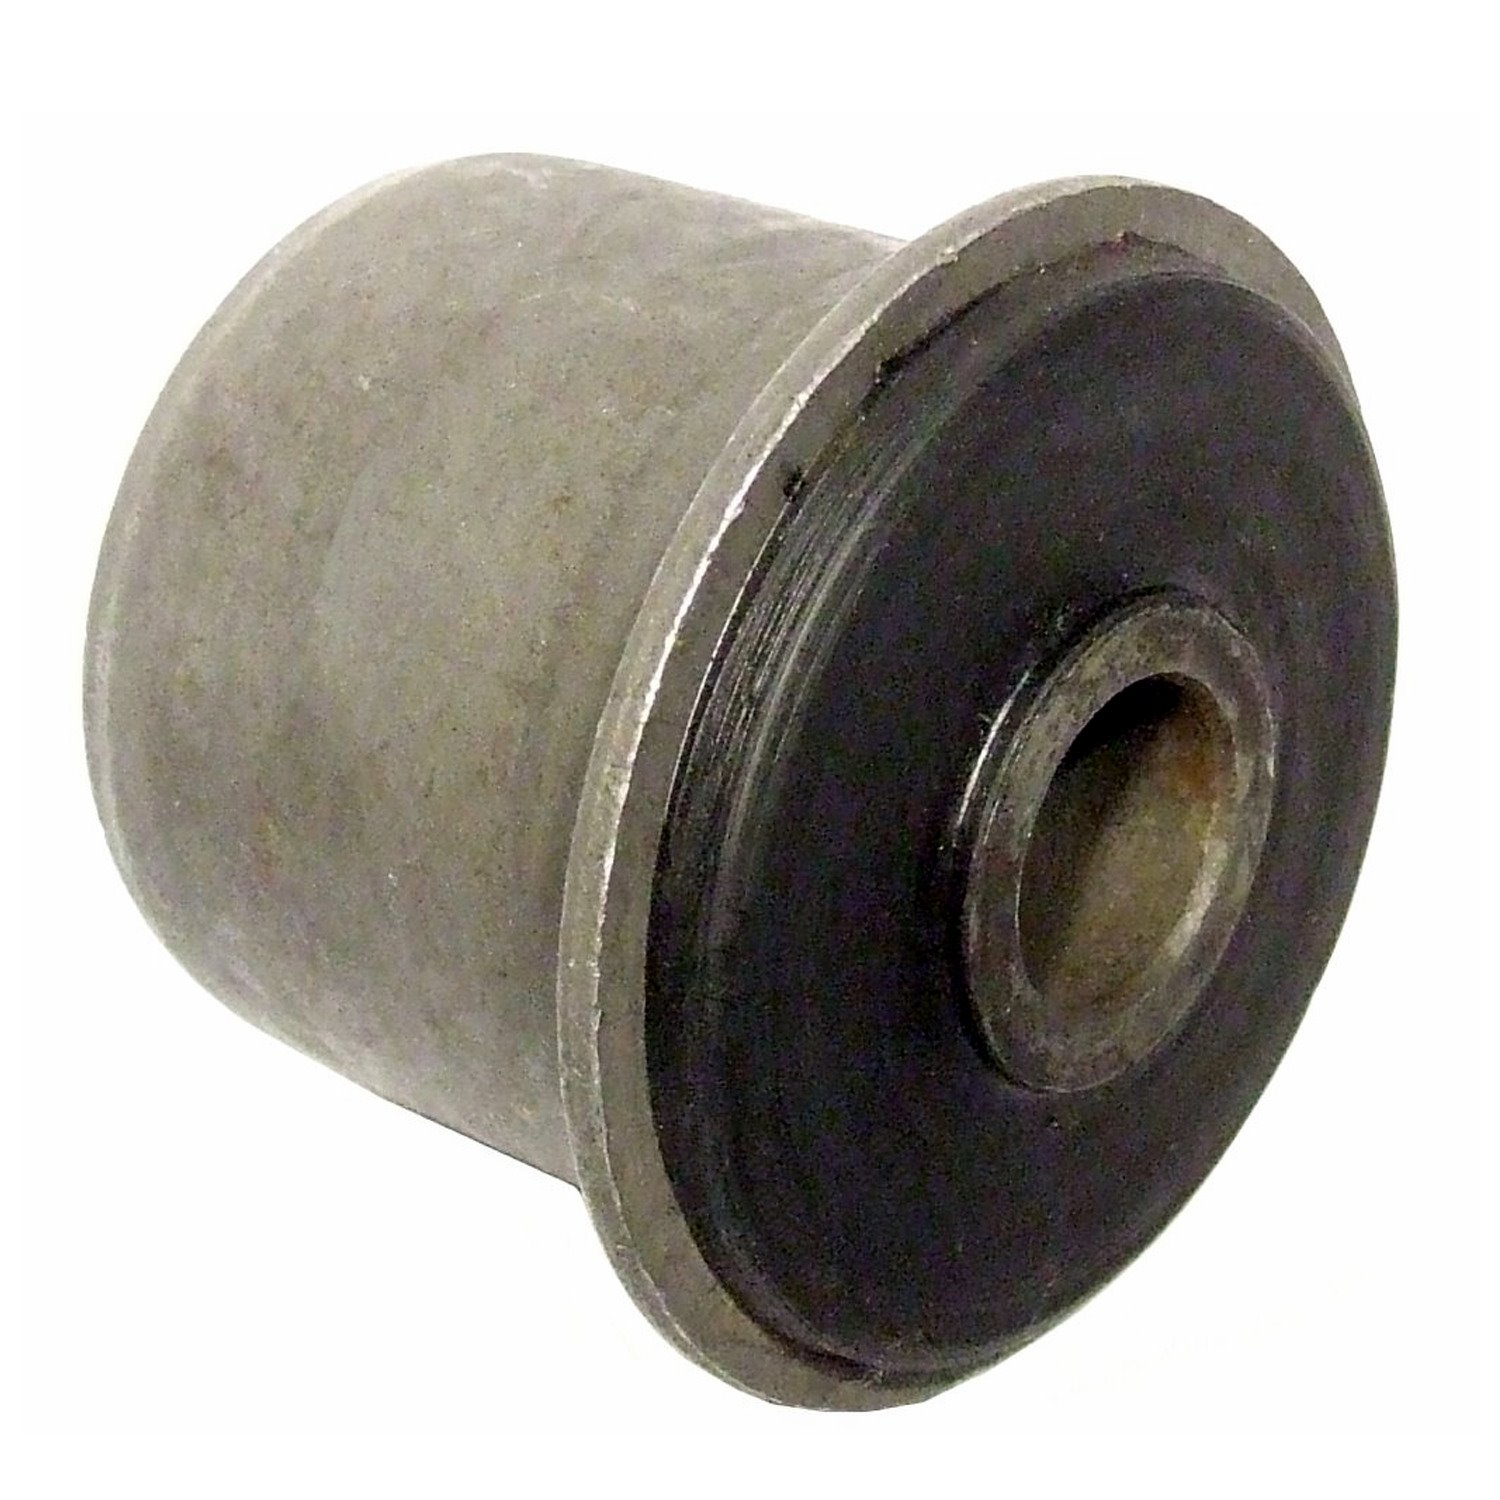 AXLE SUPPORT BUSHING